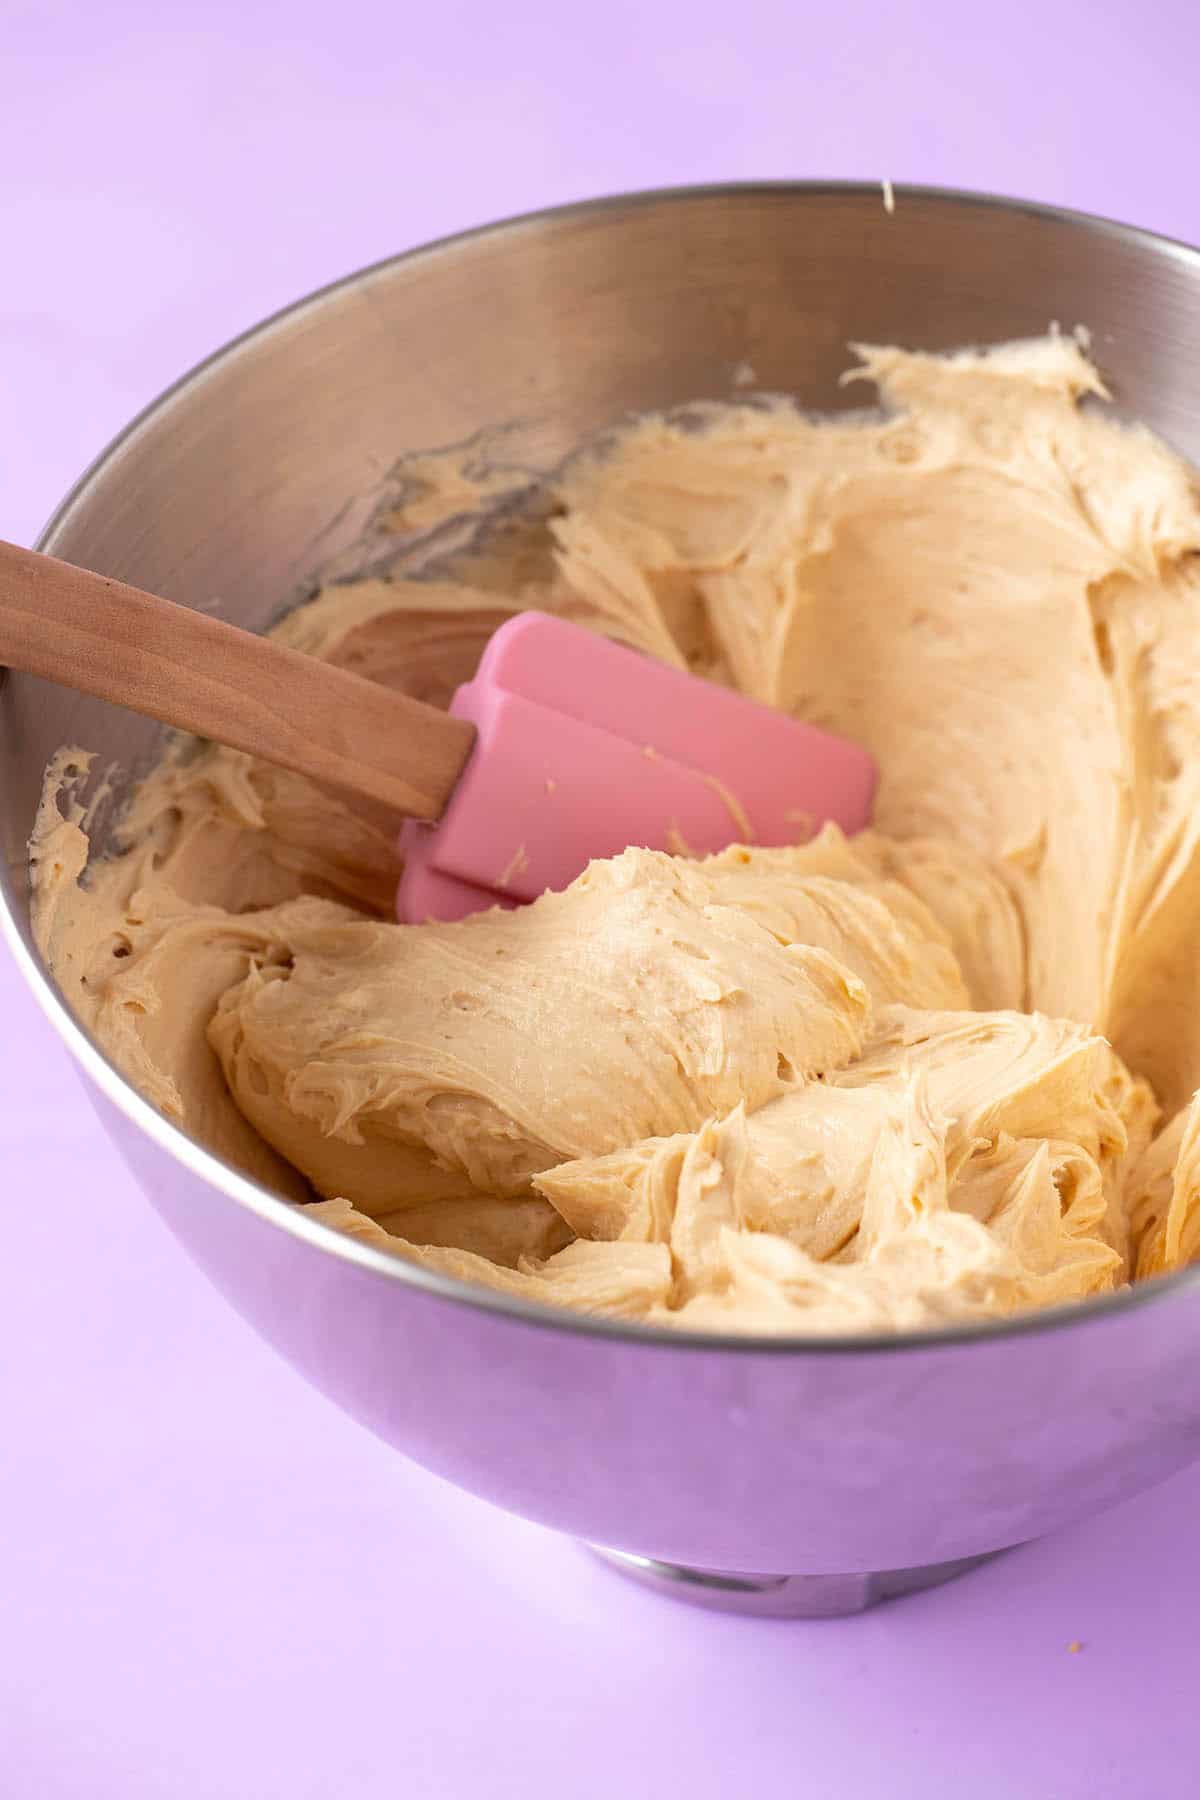 A mixing bowl filled with creamy peanut butter filling